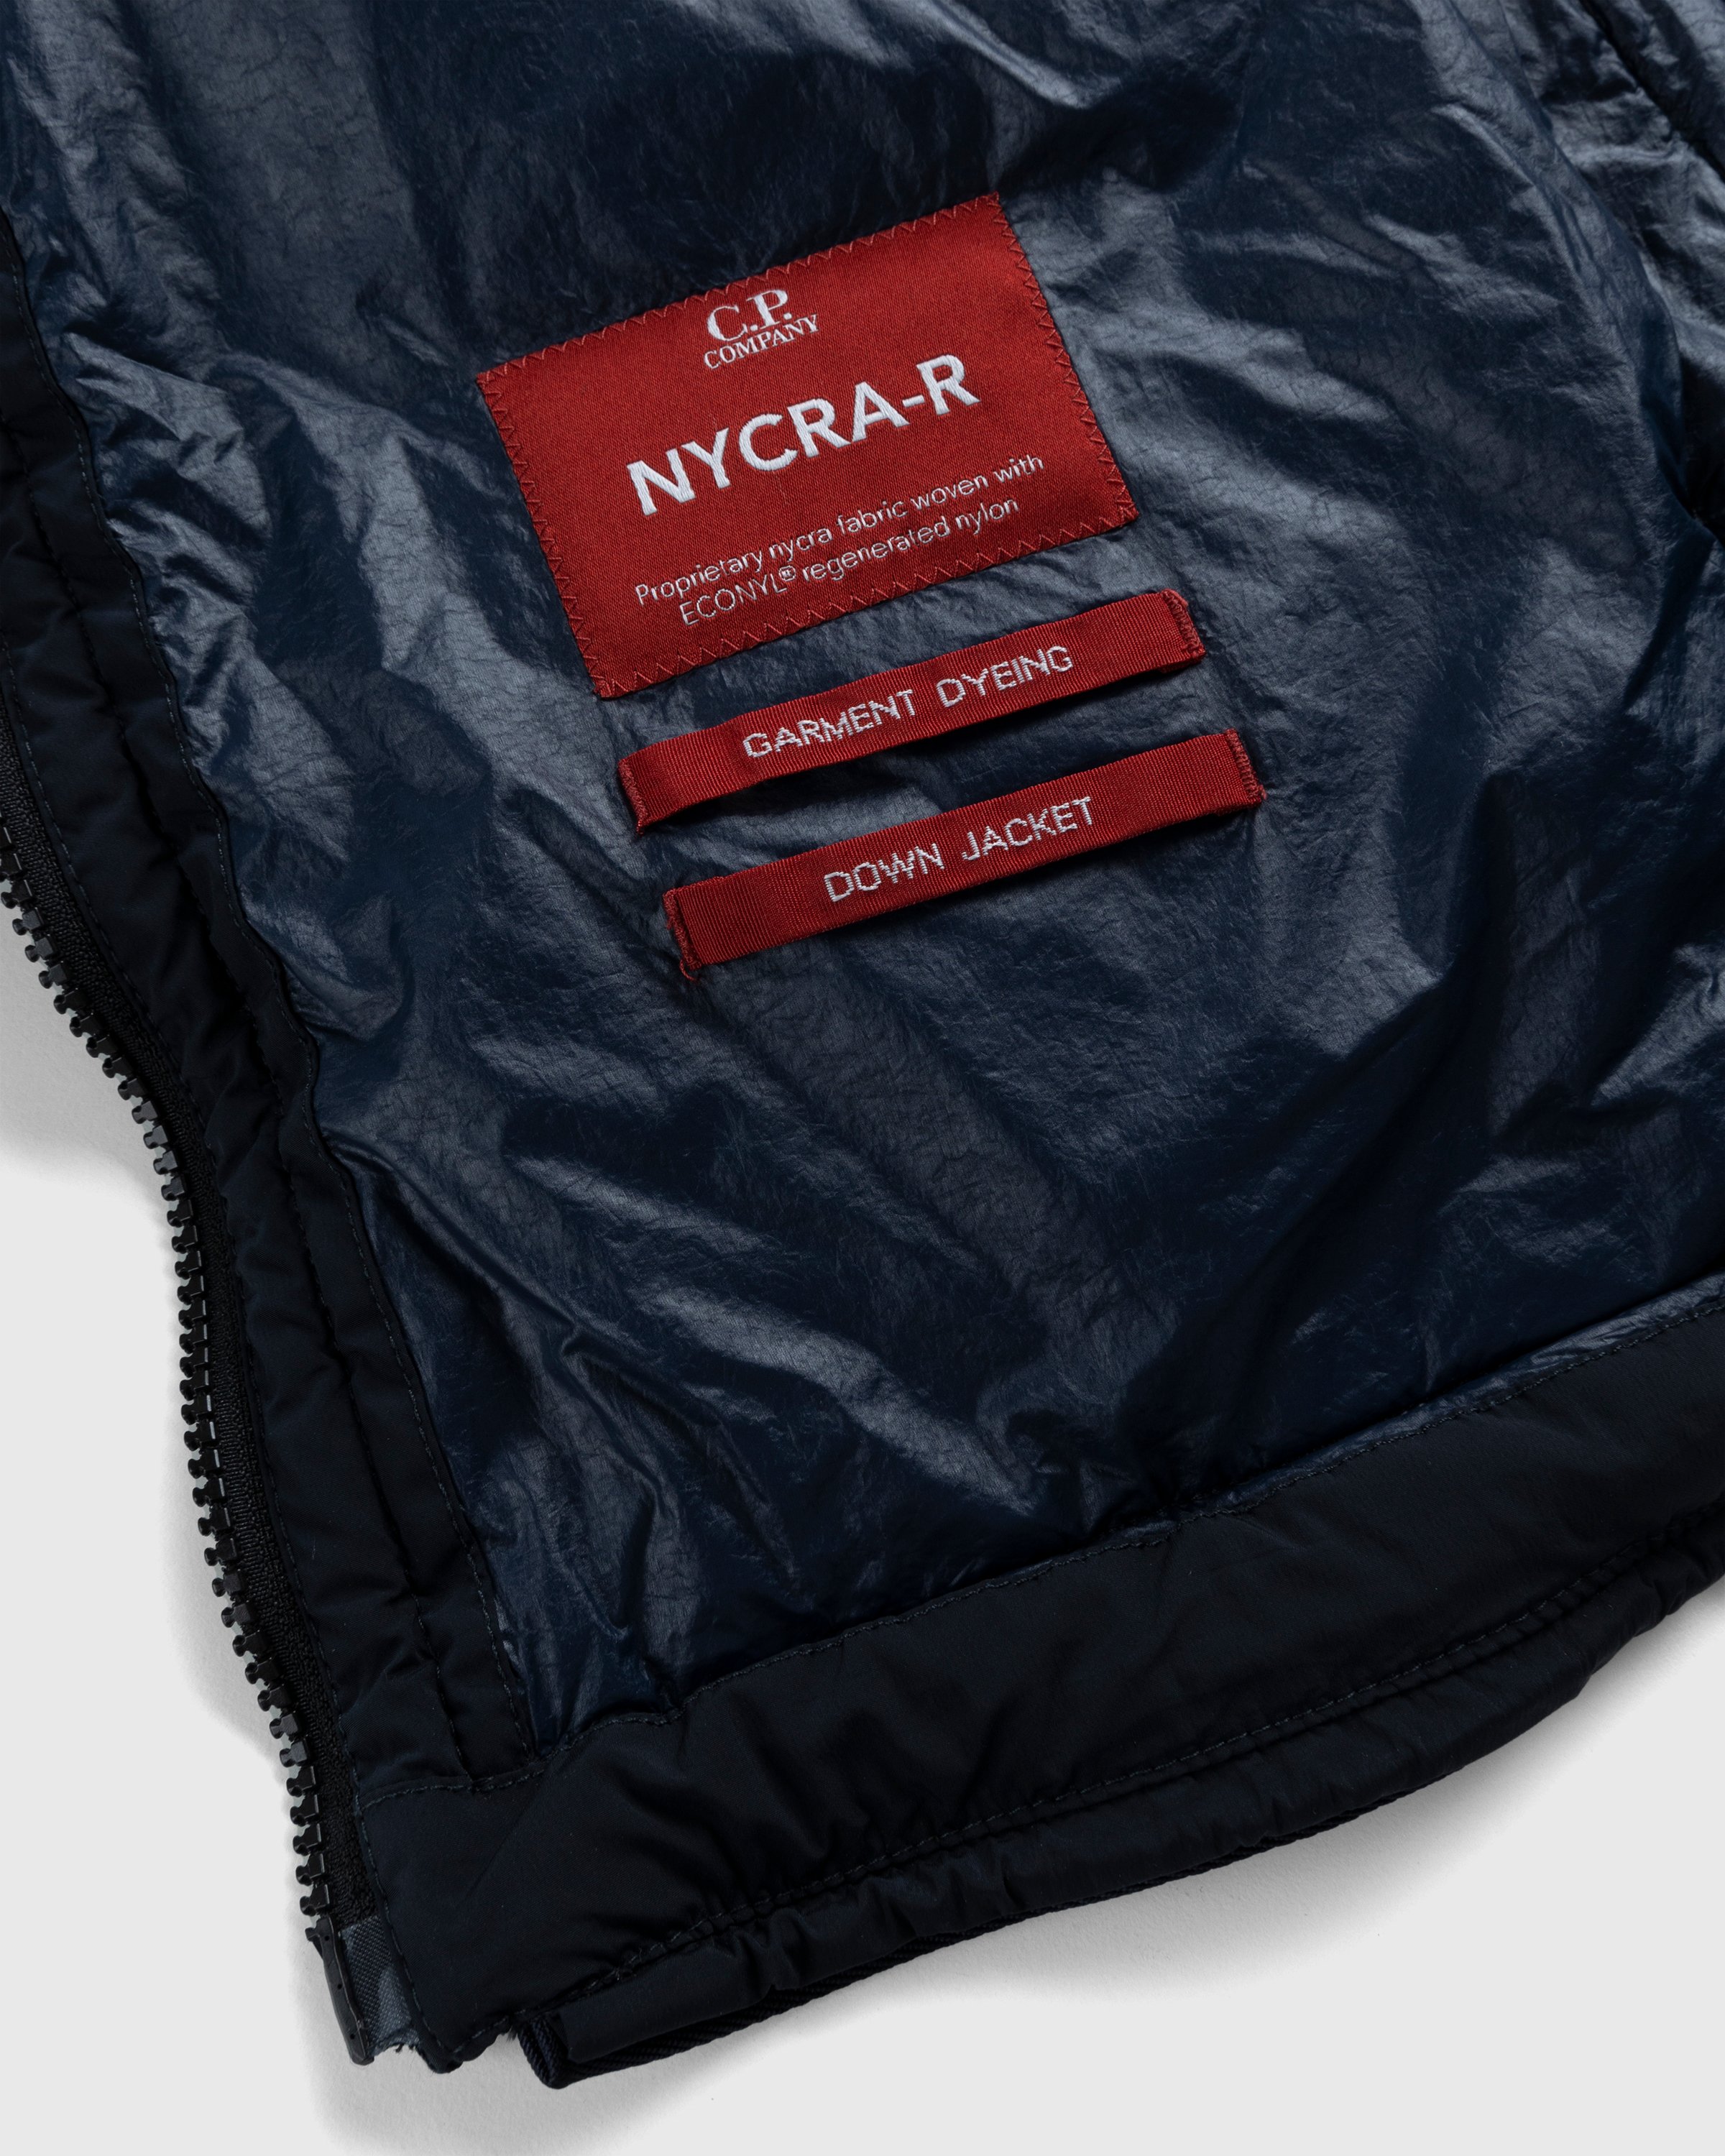 C.P. Company - Nycra-R Down Jacket Black - Outerwear - Black - Image 6